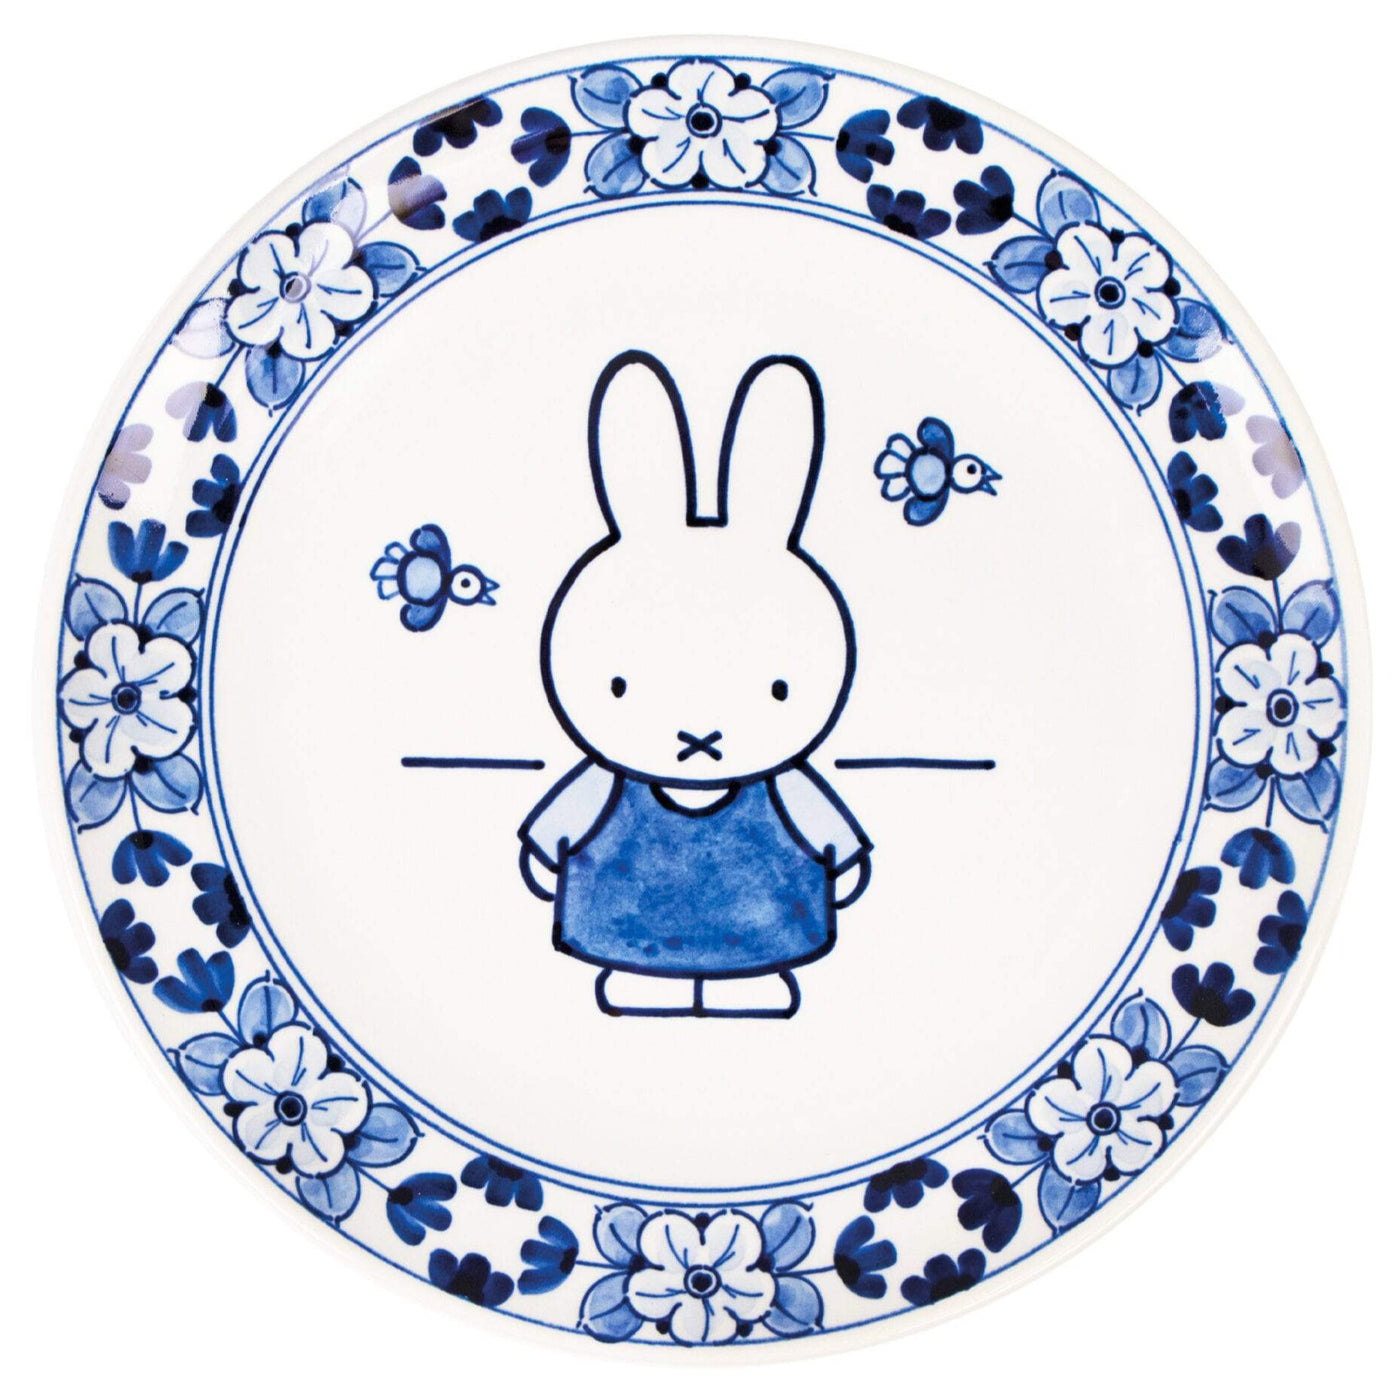 Miffy Plate Hand-Painted Delft Blue by Royal Delft